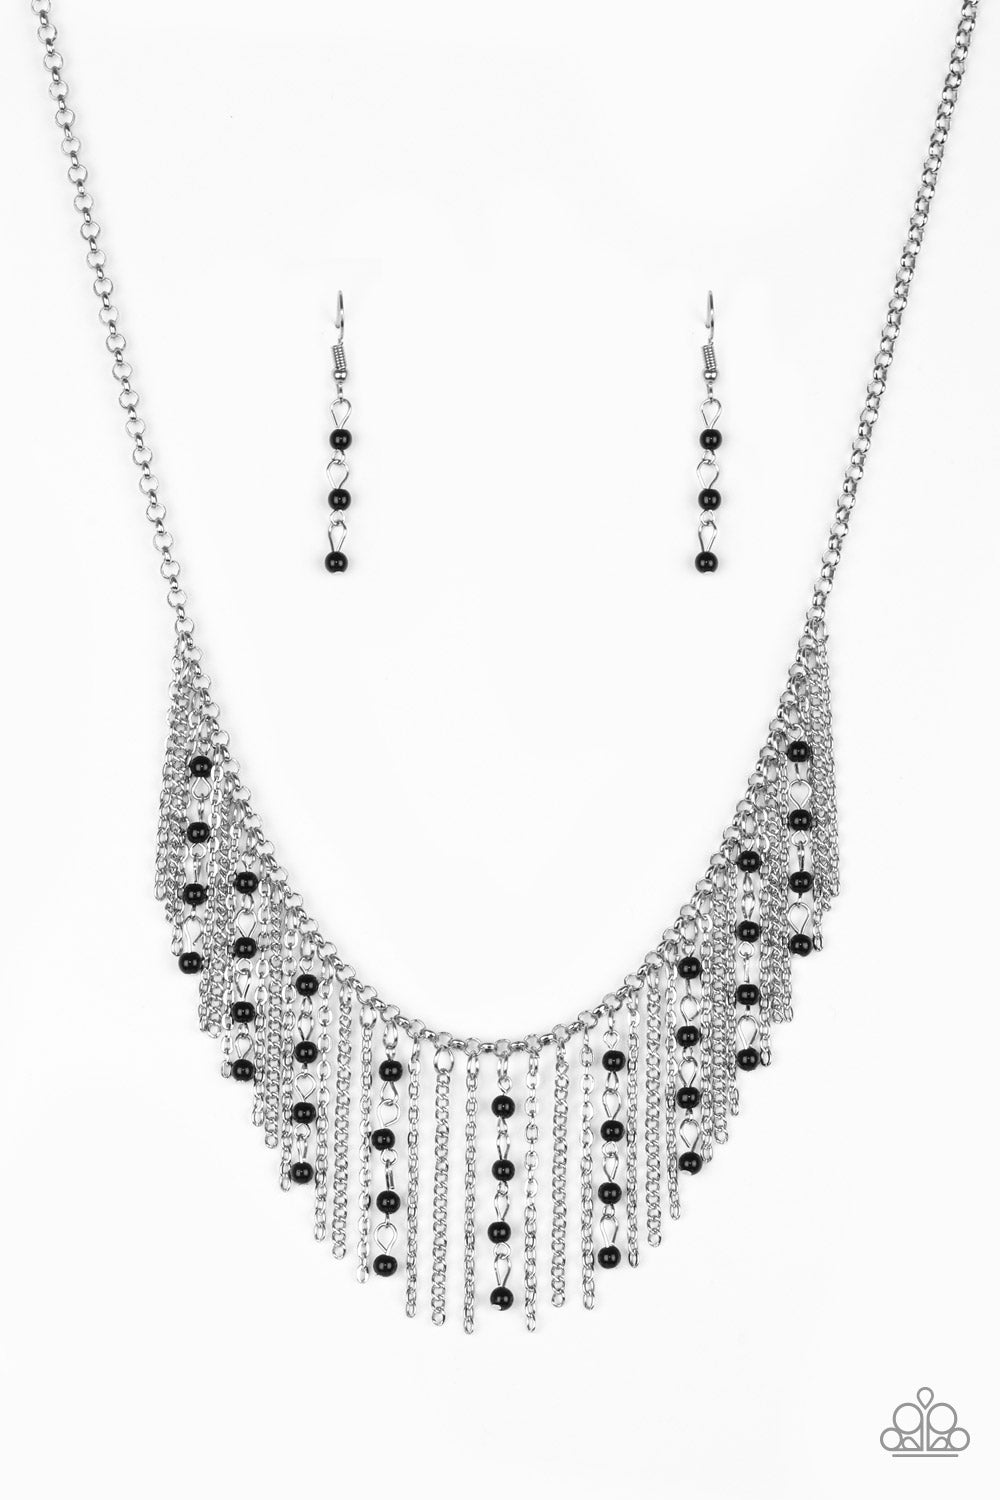 Harlem Hideaway - Silver and Black Necklace - Paparazzi Accessories - Infused with black beaded tassels, shimmery silver chains stream below the collar, creating a colorful fringe. Features an adjustable clasp closure. Sold as one individual necklace. 